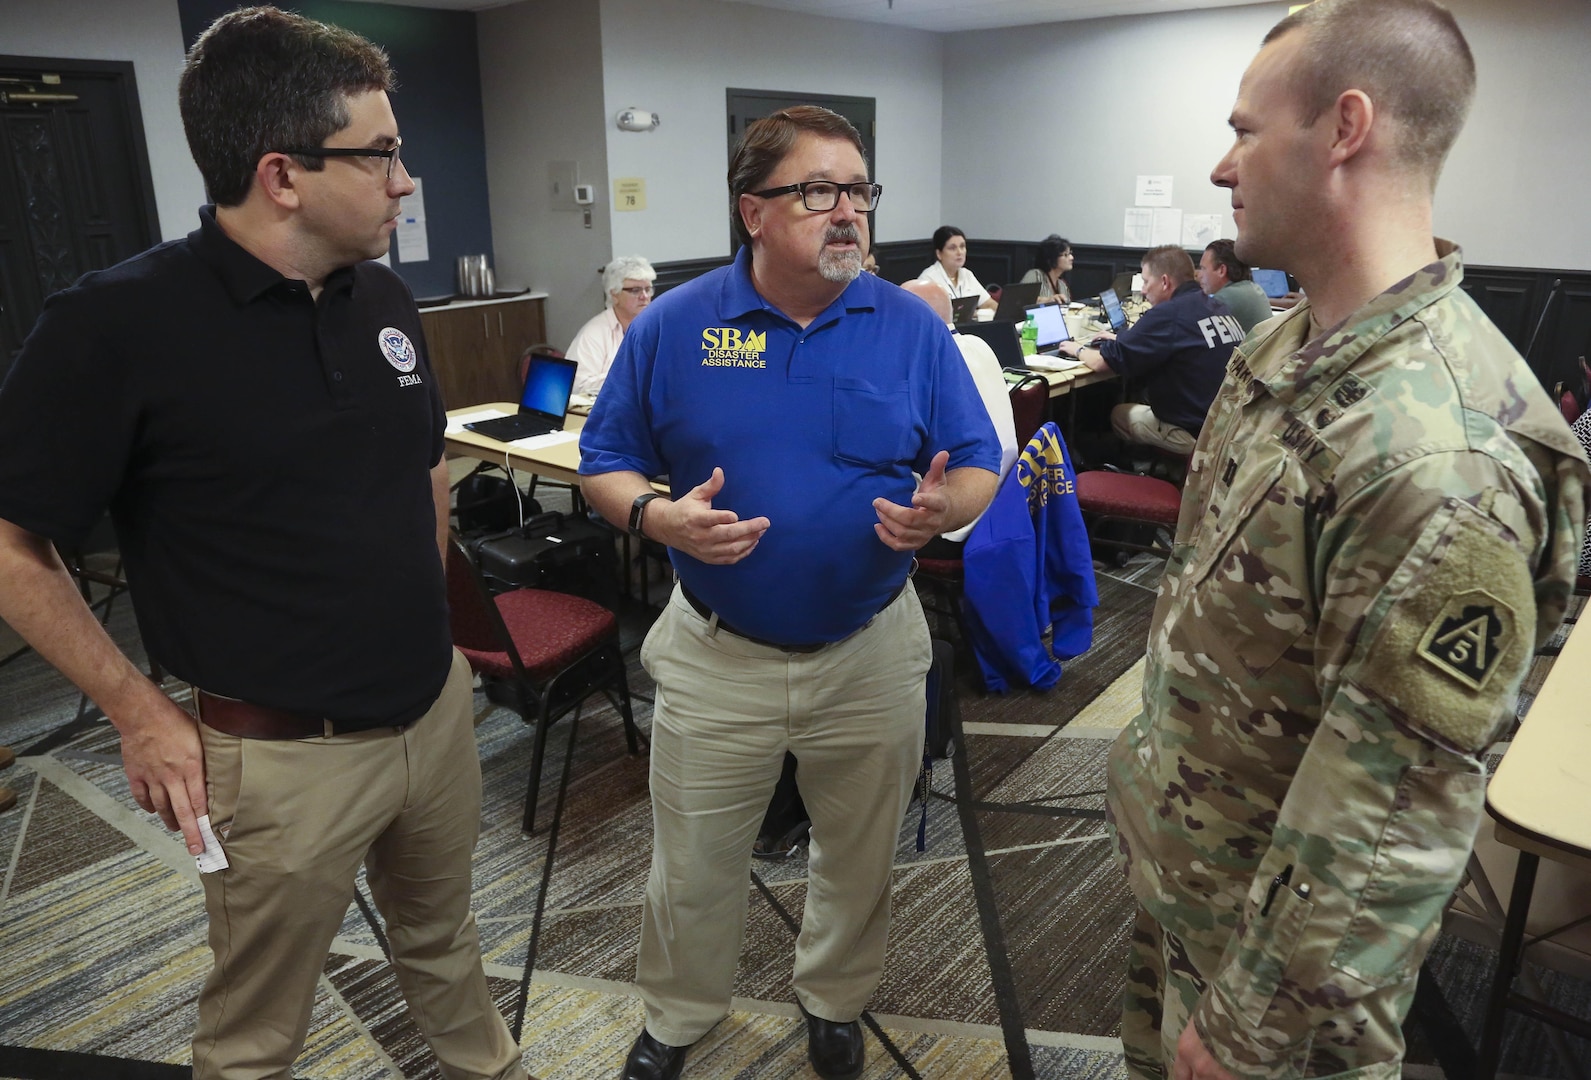 Daniel Green (left), an external affairs officer with Federal Emergency Management Agency’s Region VIII Incident Management Assistance Team, Garth MacDonald (center), a public information officer with U.S. Small Business Administration, and Cpt. Anthony Hartman (right) , a U.S. Army North (Fifth Army) engineer augmentee to Region VI, discuss integration between local, state and federal assets supporting people affected by Tropical Storm Harvey Aug. 29 in Austin, Texas.